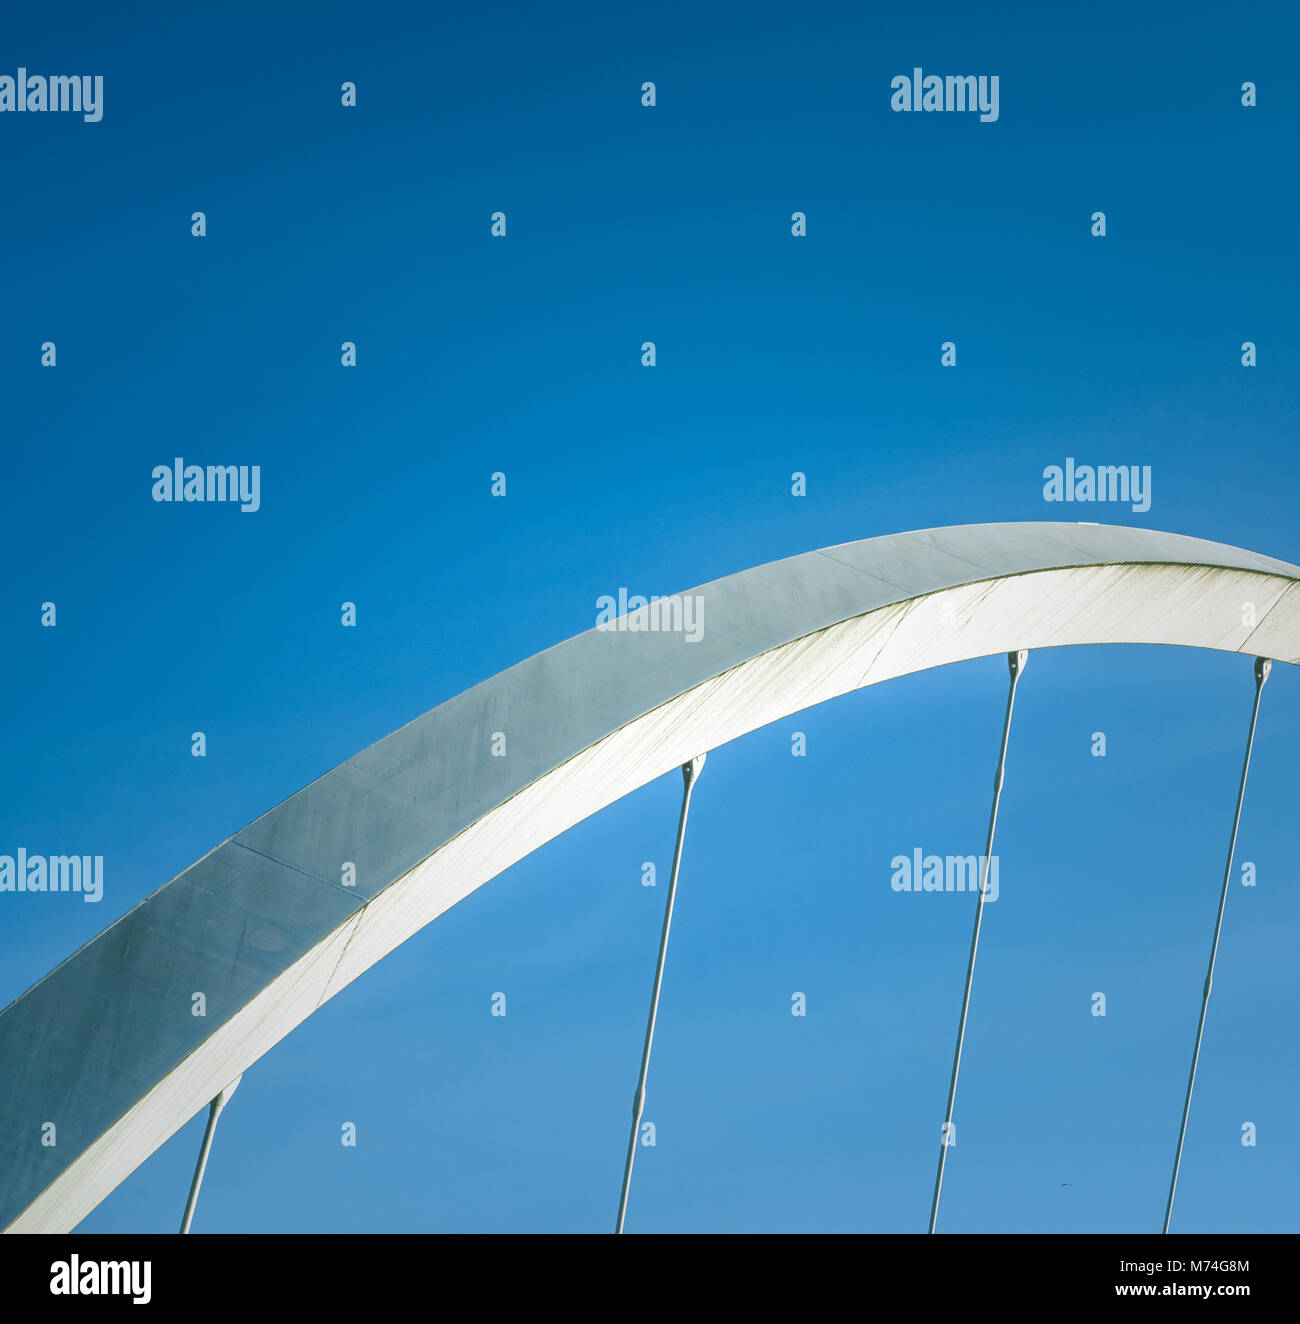 Abstract Architecture Detail Of A Section Of A Suspension Bridge With Blue Sky And Copy Space Stock Photo